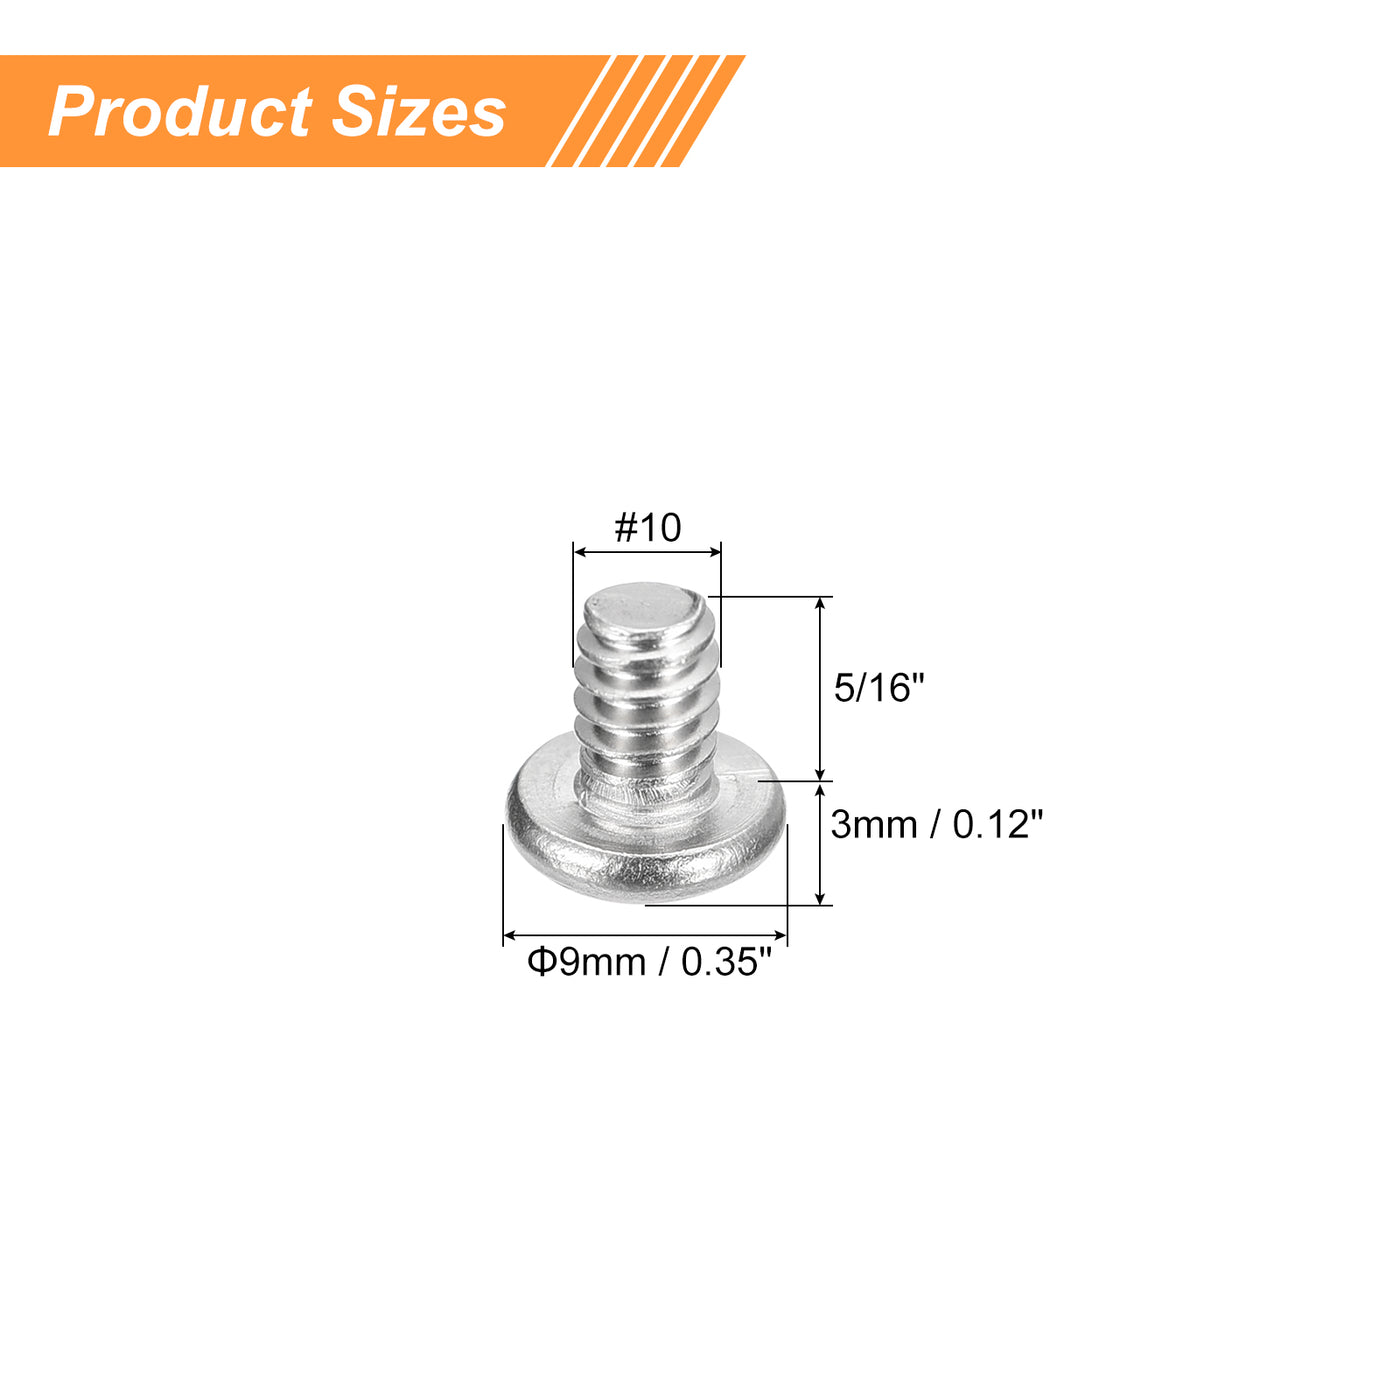 uxcell Uxcell #10-24x5/16" Pan Head Machine Screws, Stainless Steel 18-8 Screw, Pack of 20